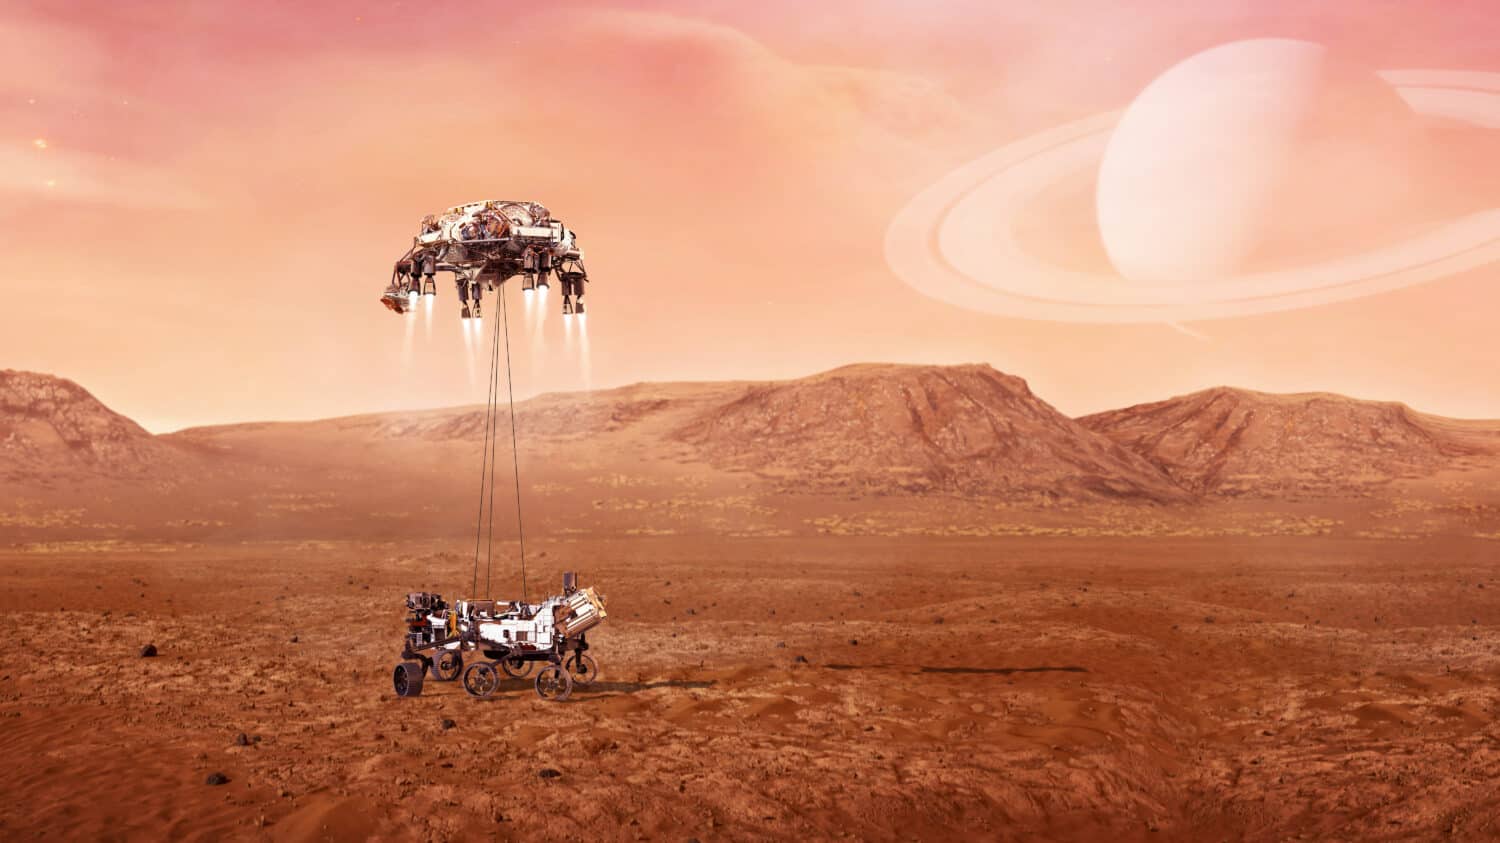 Landing of Mars Rover on surface of red planet. Elements of this image furnished by NASA.